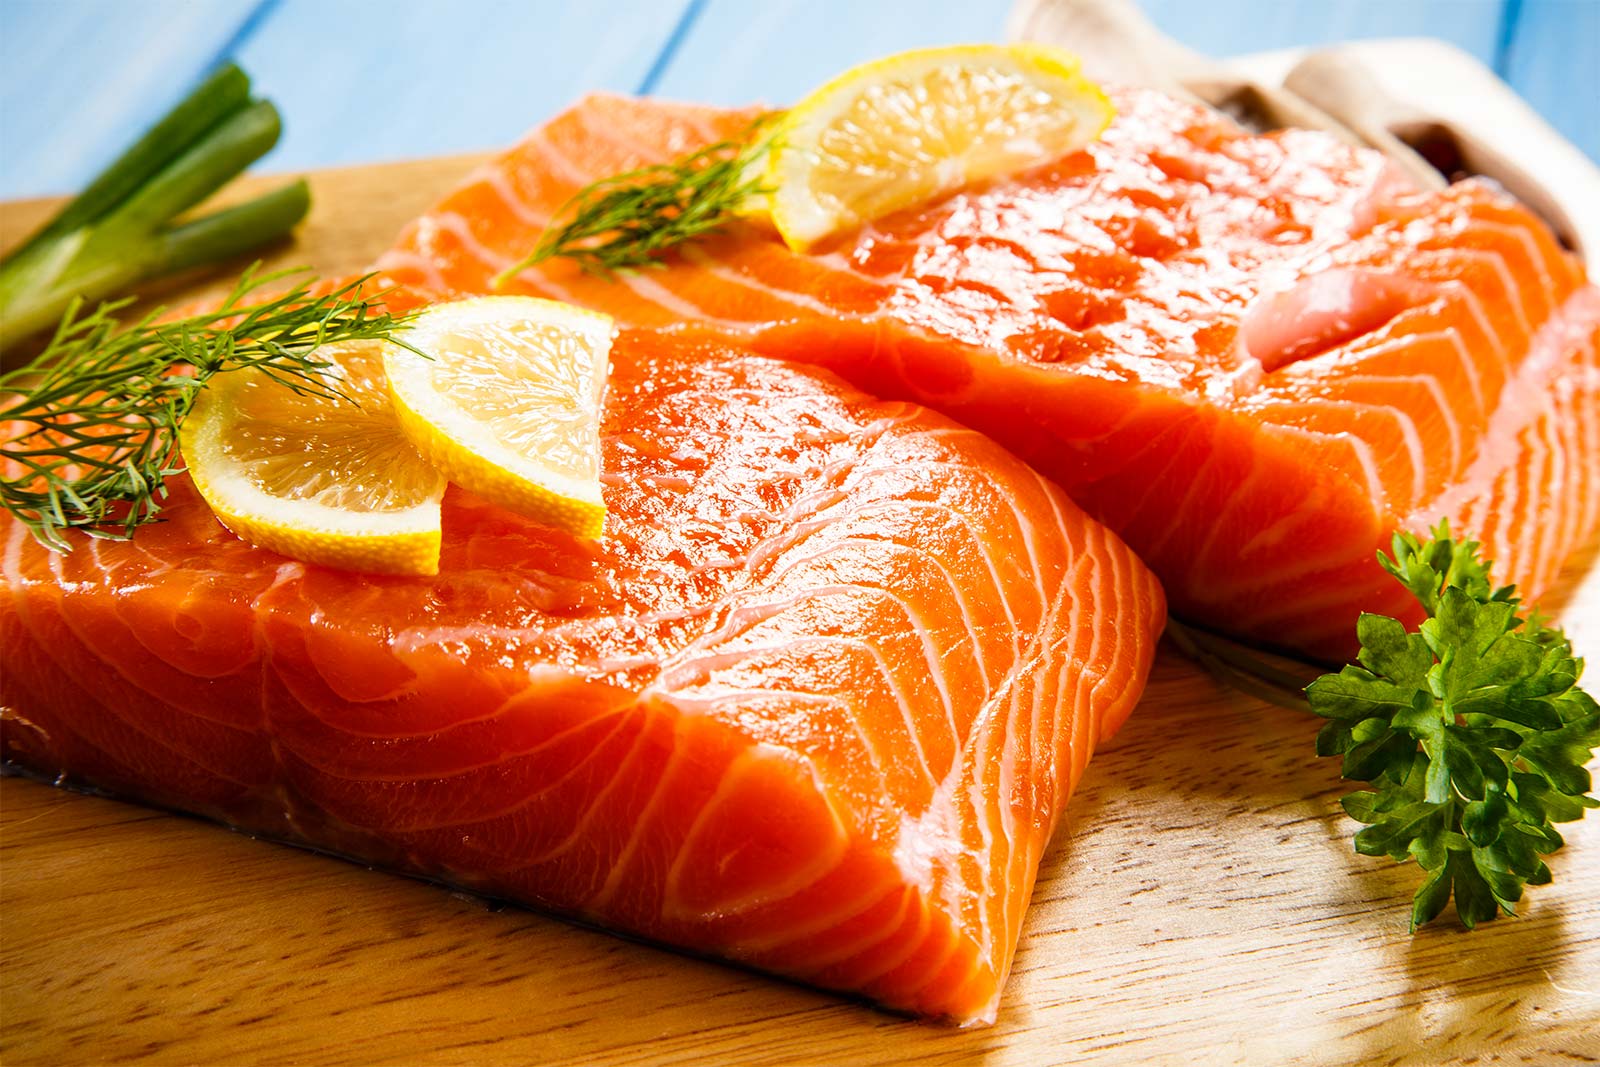 Only a Posh Person Will Have Eaten at Least 11/21 of These Foods Wild salmon